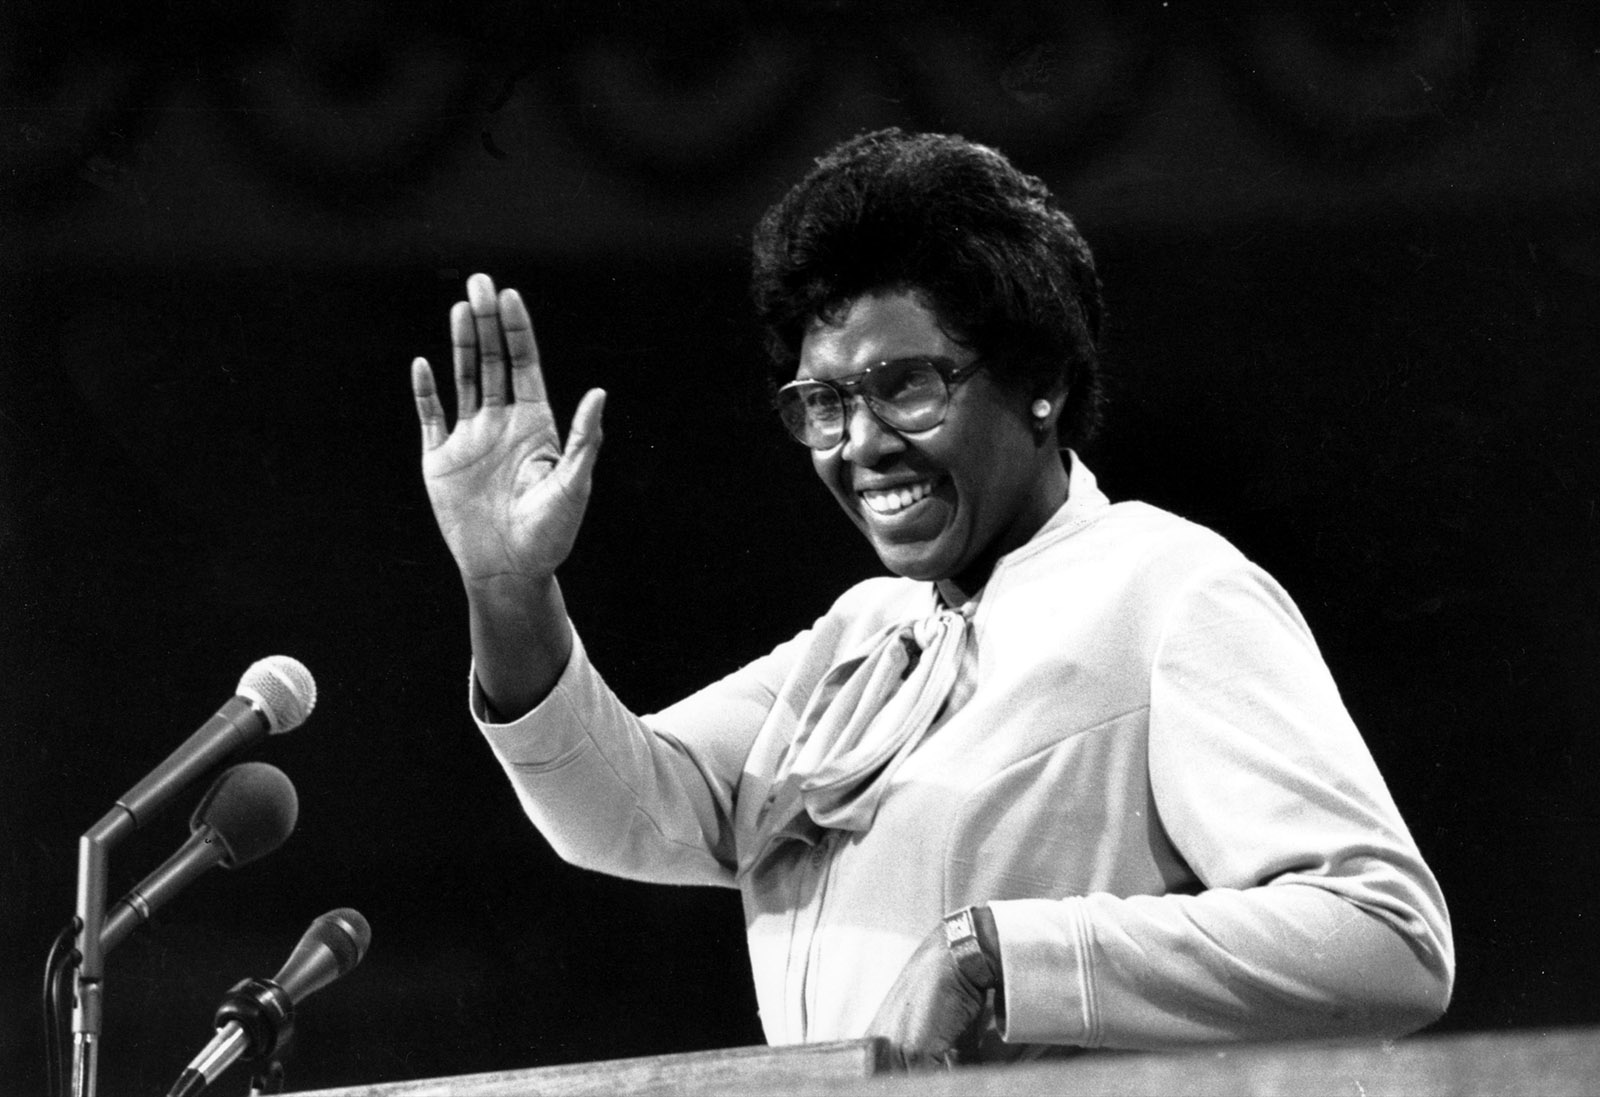 FILE - In this July 12, 1976, file photo, Rep. Barbara Jordan of Texas waves as she speaks to the Democratic National Convention in New York City. Clint Eastwood gave the Republicans some offbeat remarks to remember in 2012. Will the Democrats come up with any memorable lines? Some past Democratic convention speeches that live on include Jordan becoming the first black and first woman to deliver the party's keynote address: "My presence here is one additional bit of evidence that the American Dream need not be forever deferred," she said. (AP Photo/File)